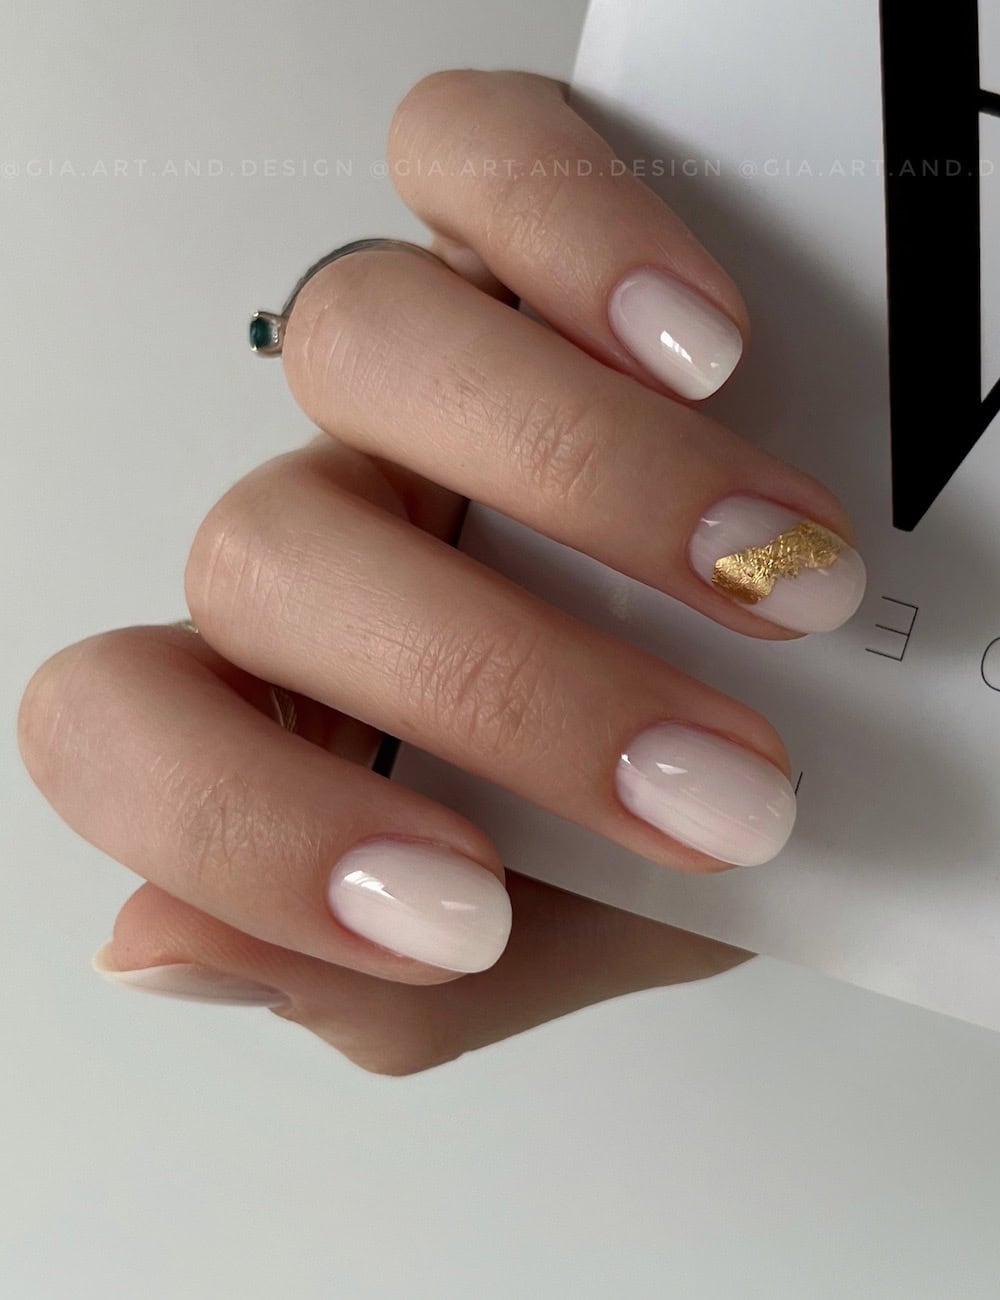 short round milky white nails with a gold foil accent nail